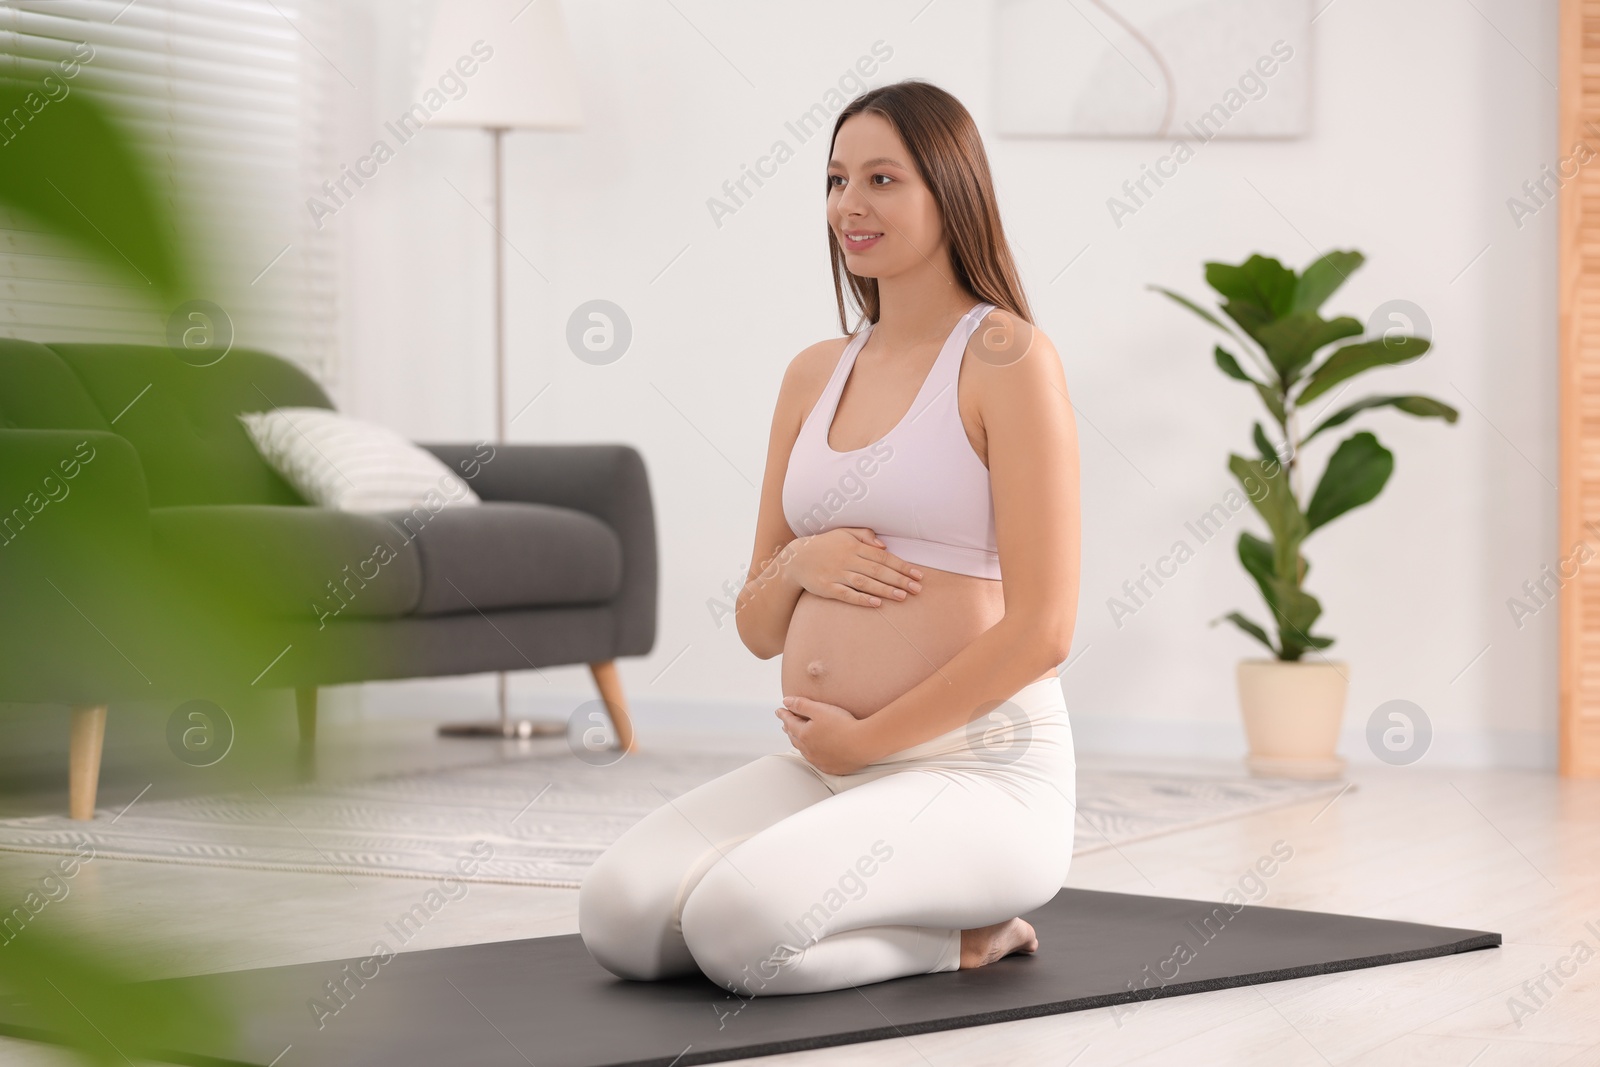 Photo of Pregnant woman sitting on yoga mat at home, space for text